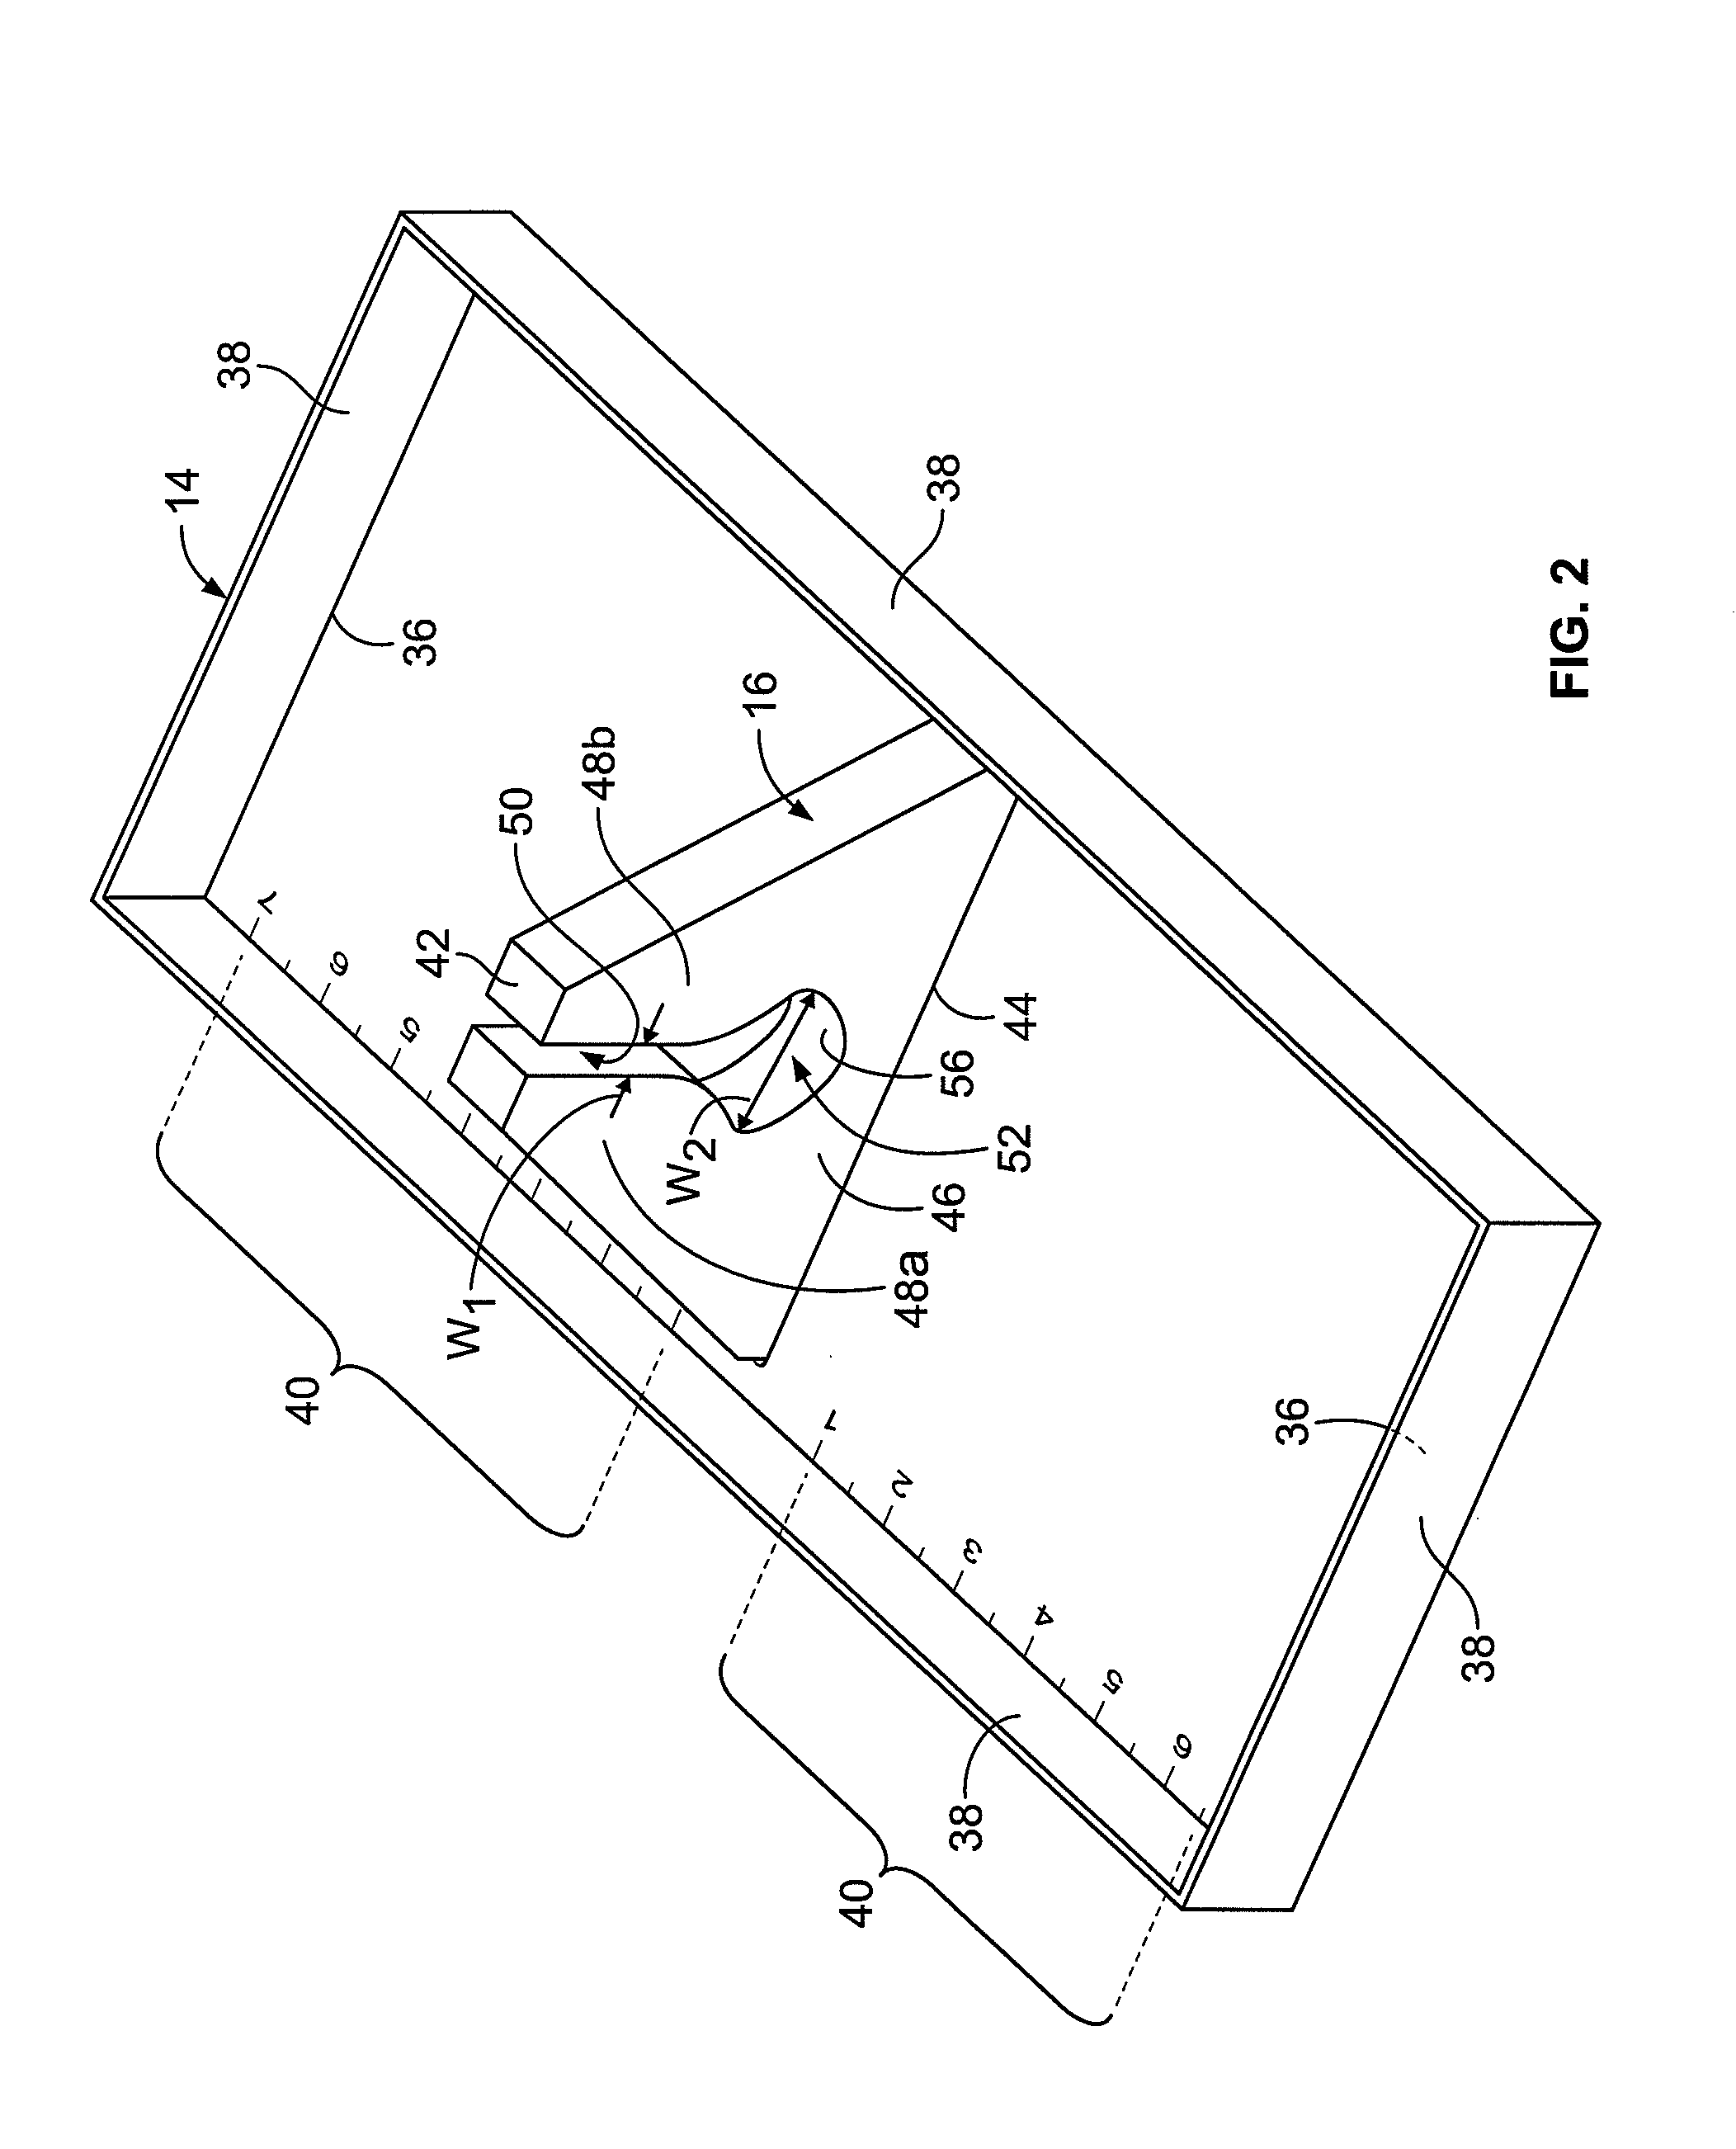 Bow making device and methods of use thereof